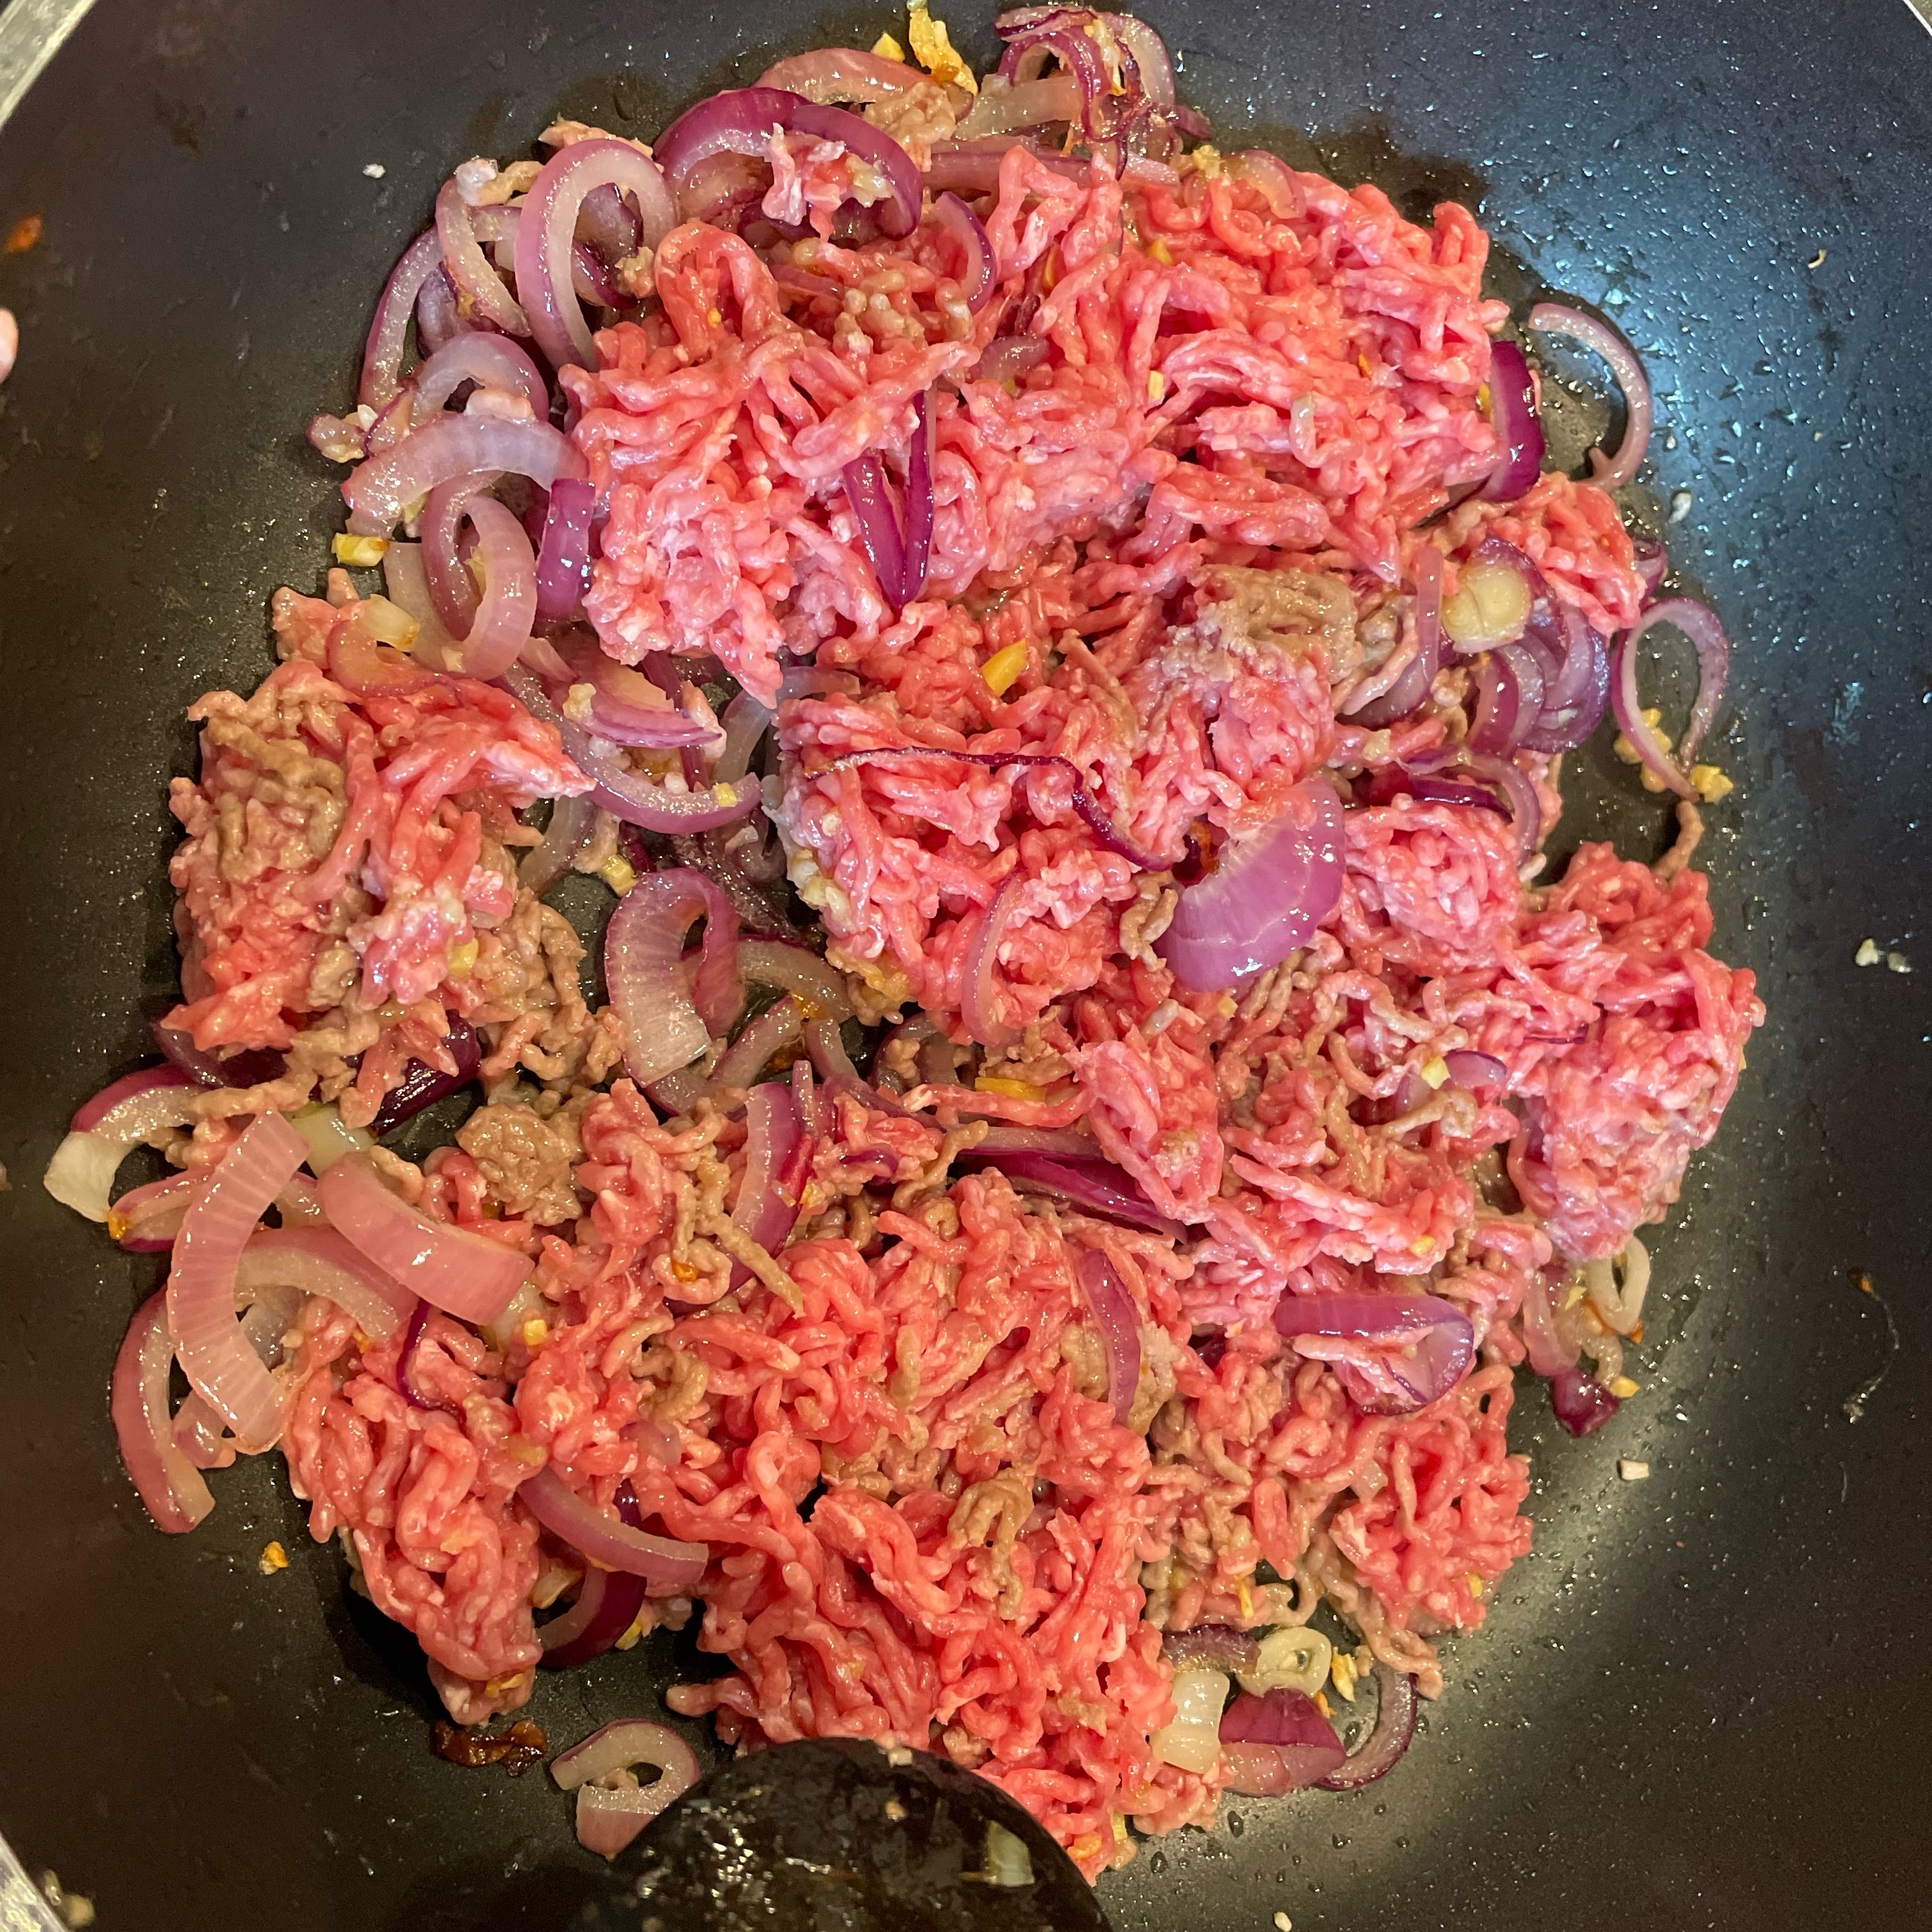 Add ground beef, mix and cook about 5min on medium heat till changing color.